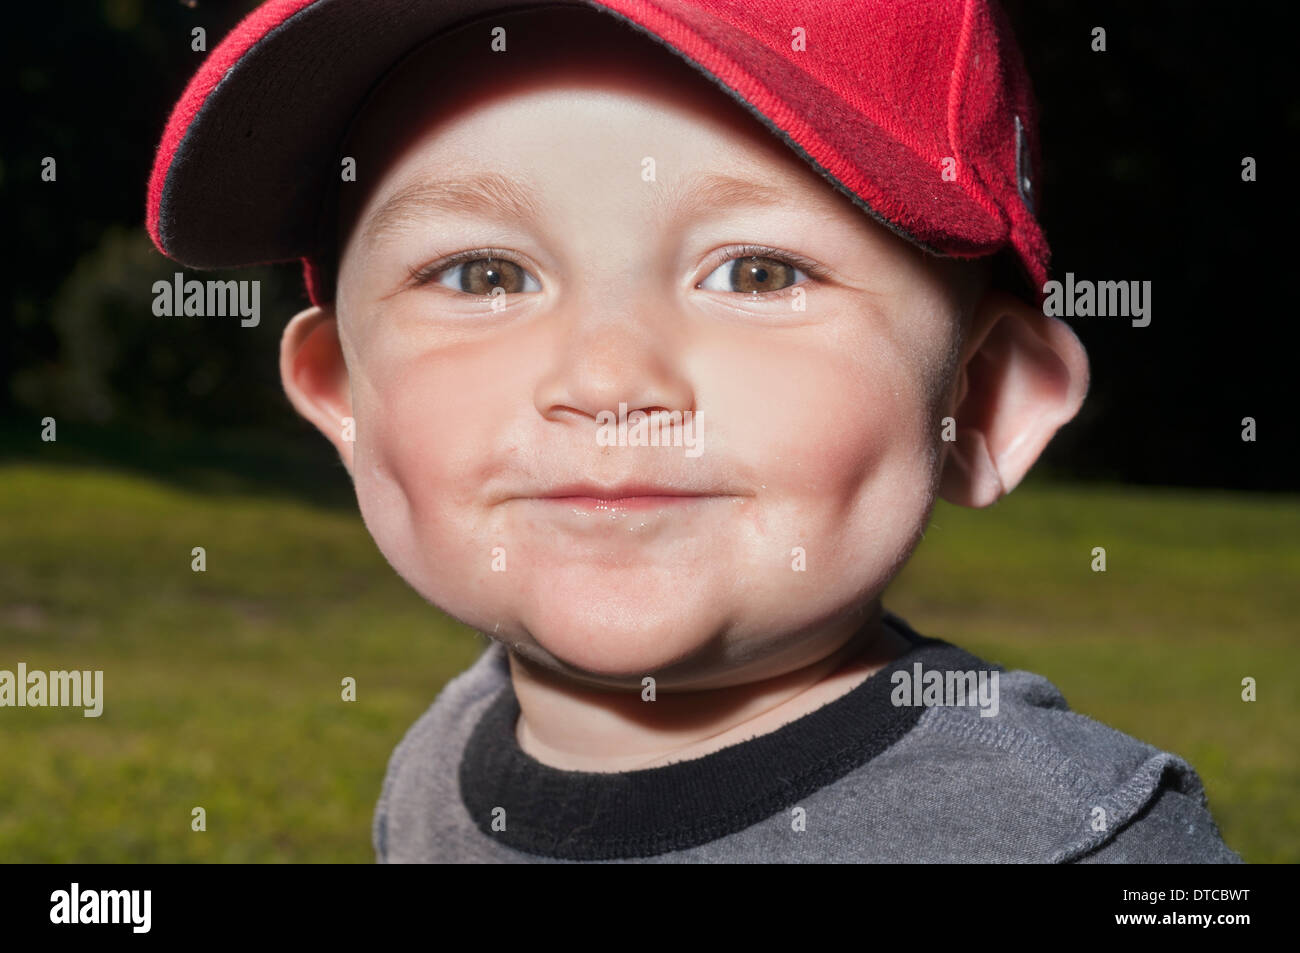 A 14-month-old Caucasian toddler wearing a red hat has his portrait taken in Prospect Park in Brooklyn, NY. Stock Photo